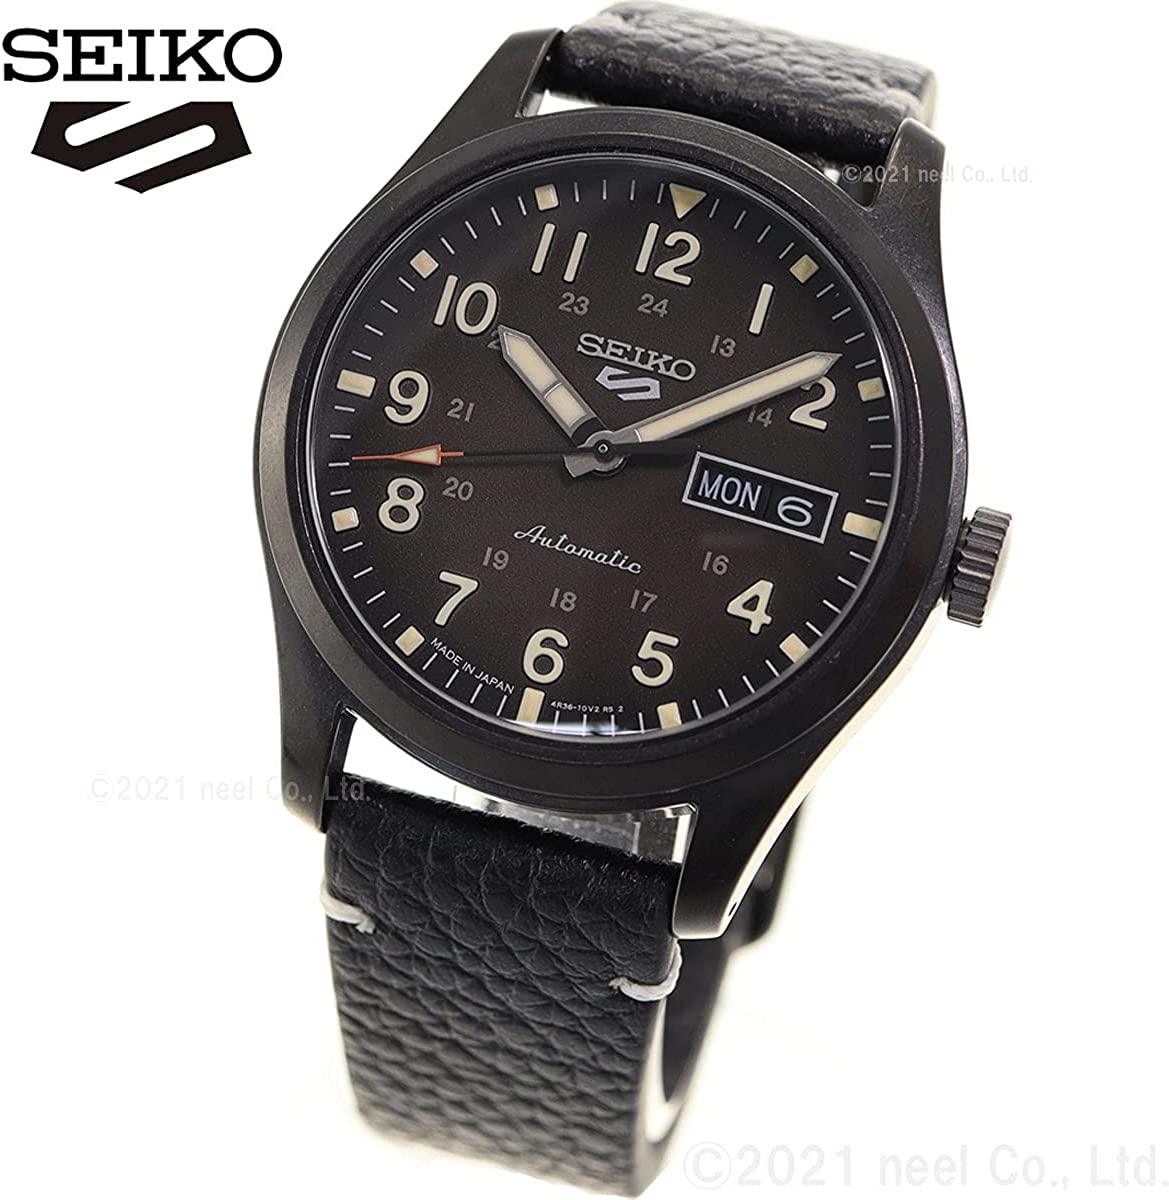 Seiko 5 Sports SEIKO 5 SPORTS Automatic Mechanical Distribution Limited  Model Watch Men's Seiko Five Specialist Specialist SBSA121 - Discovery  Japan Mall